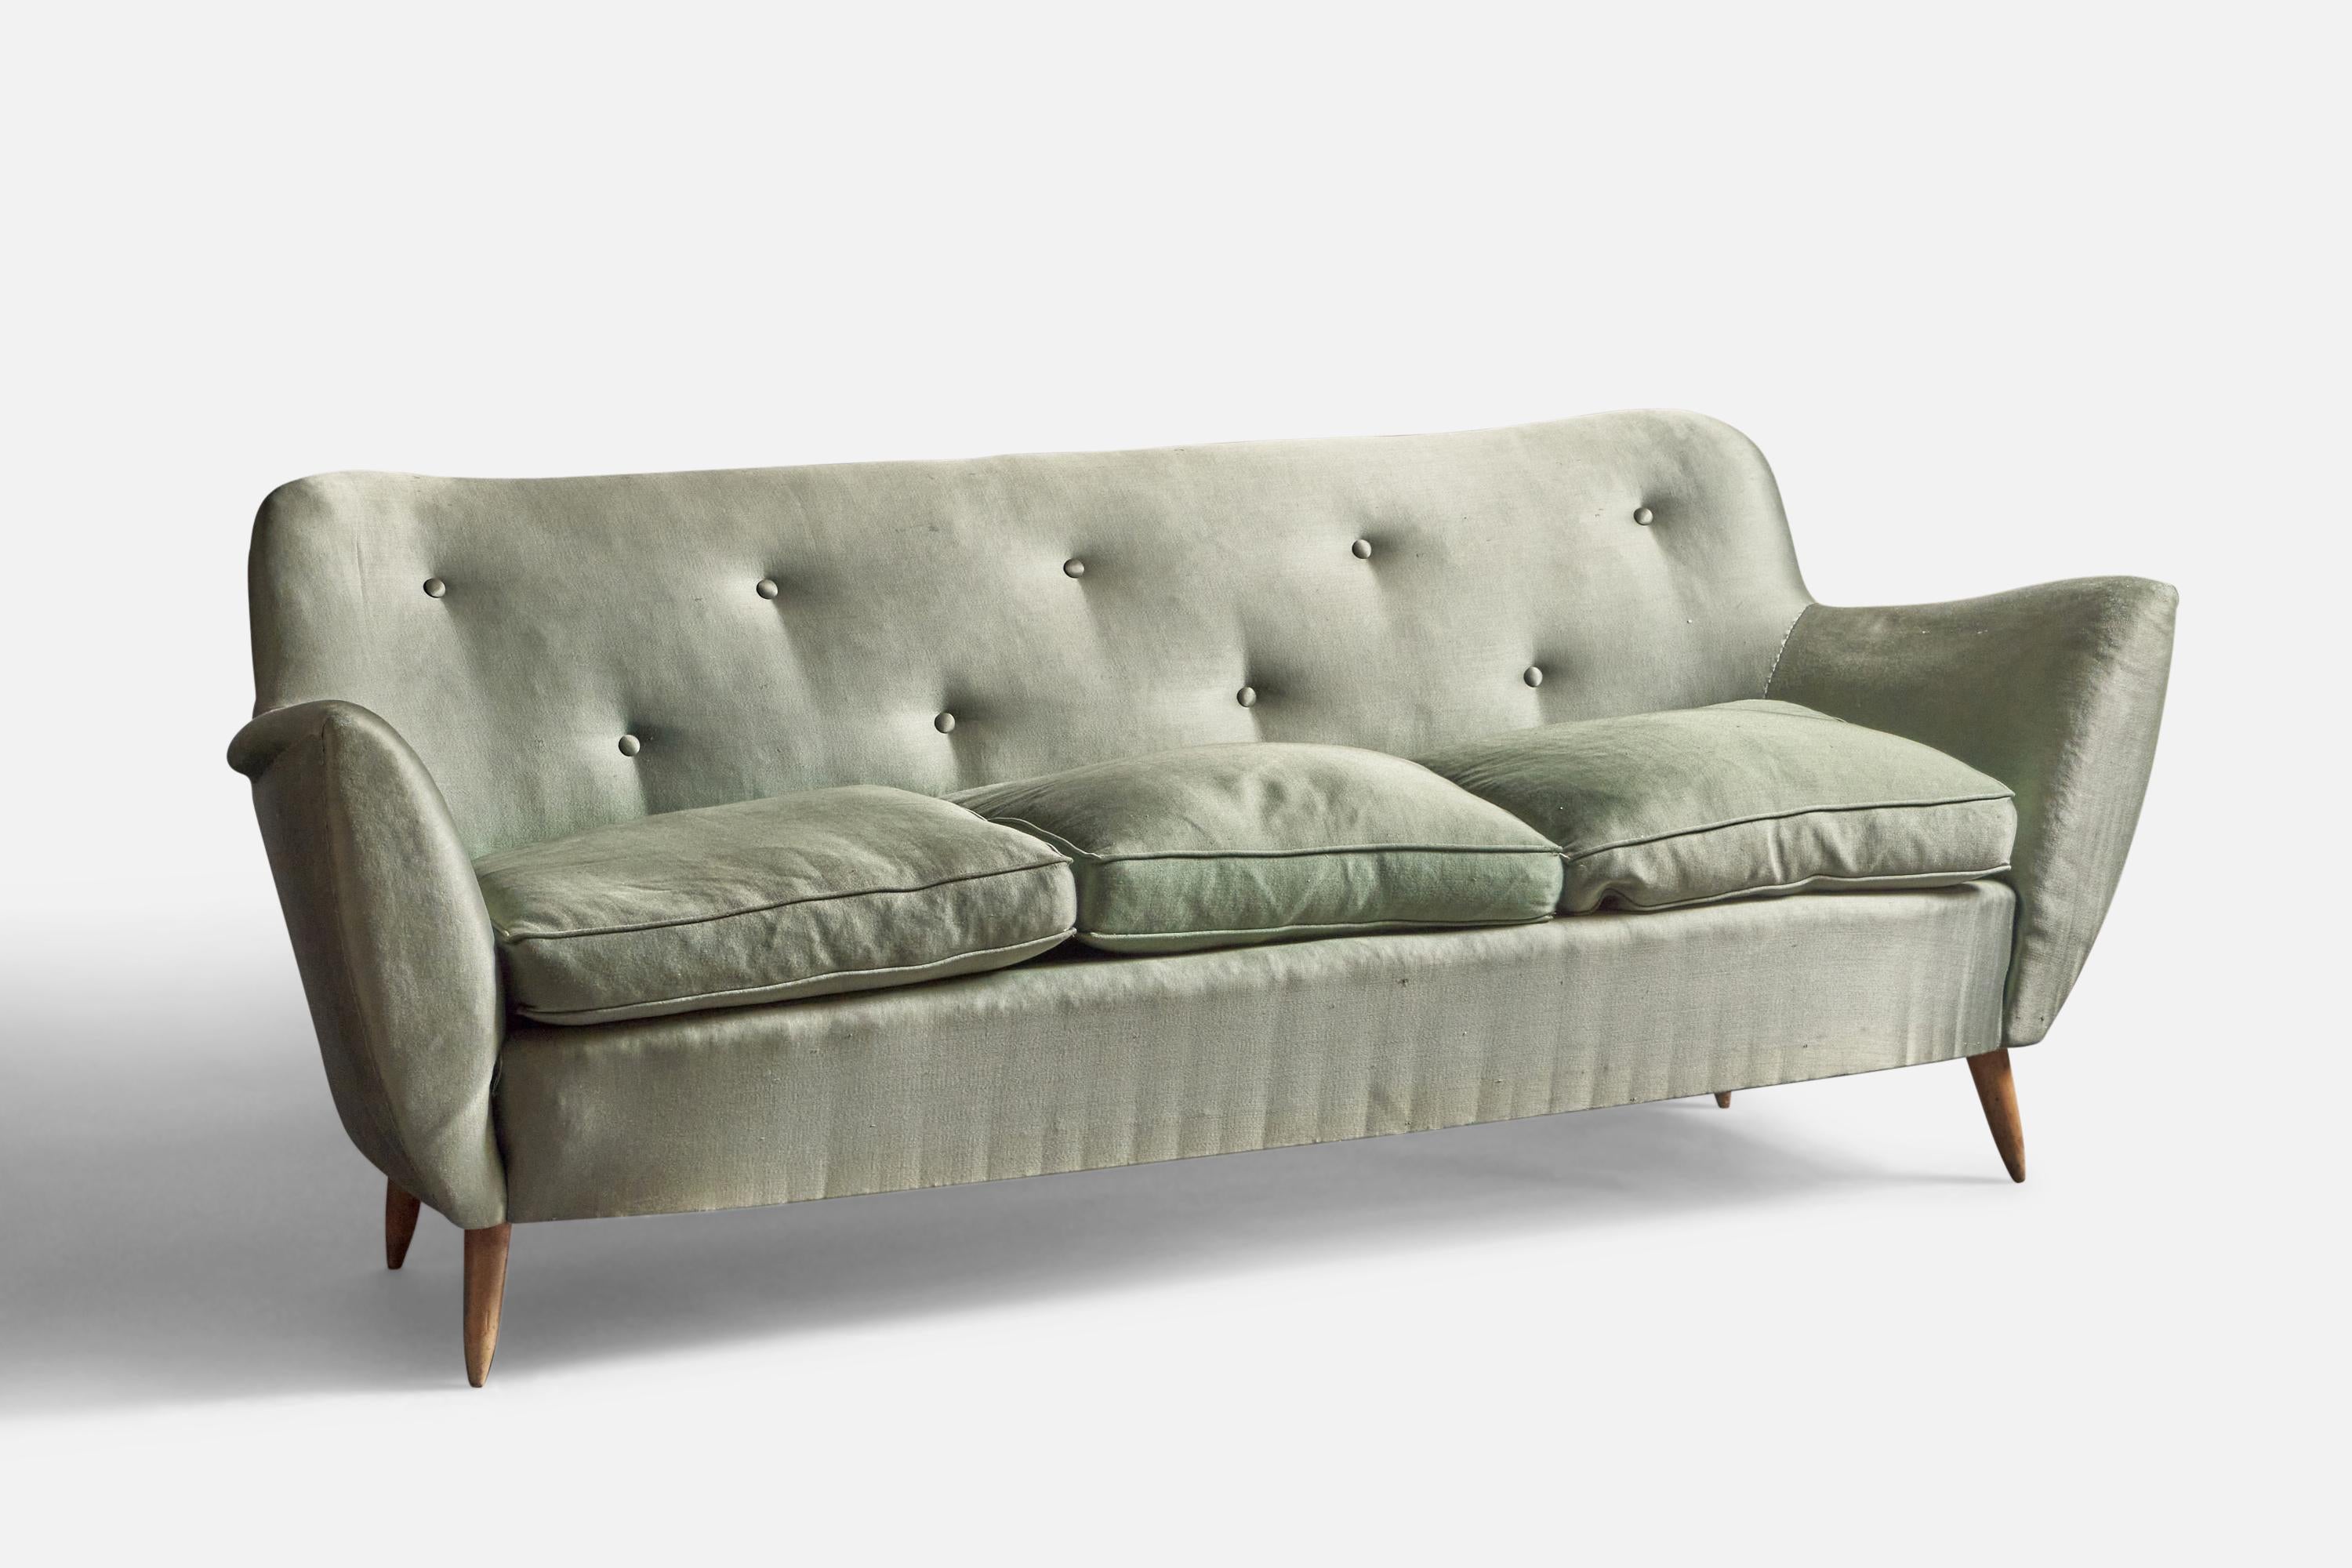 A green fabric and wood sofa, designed by Guglielmo Veronesi and produced in Italy, 1950s.